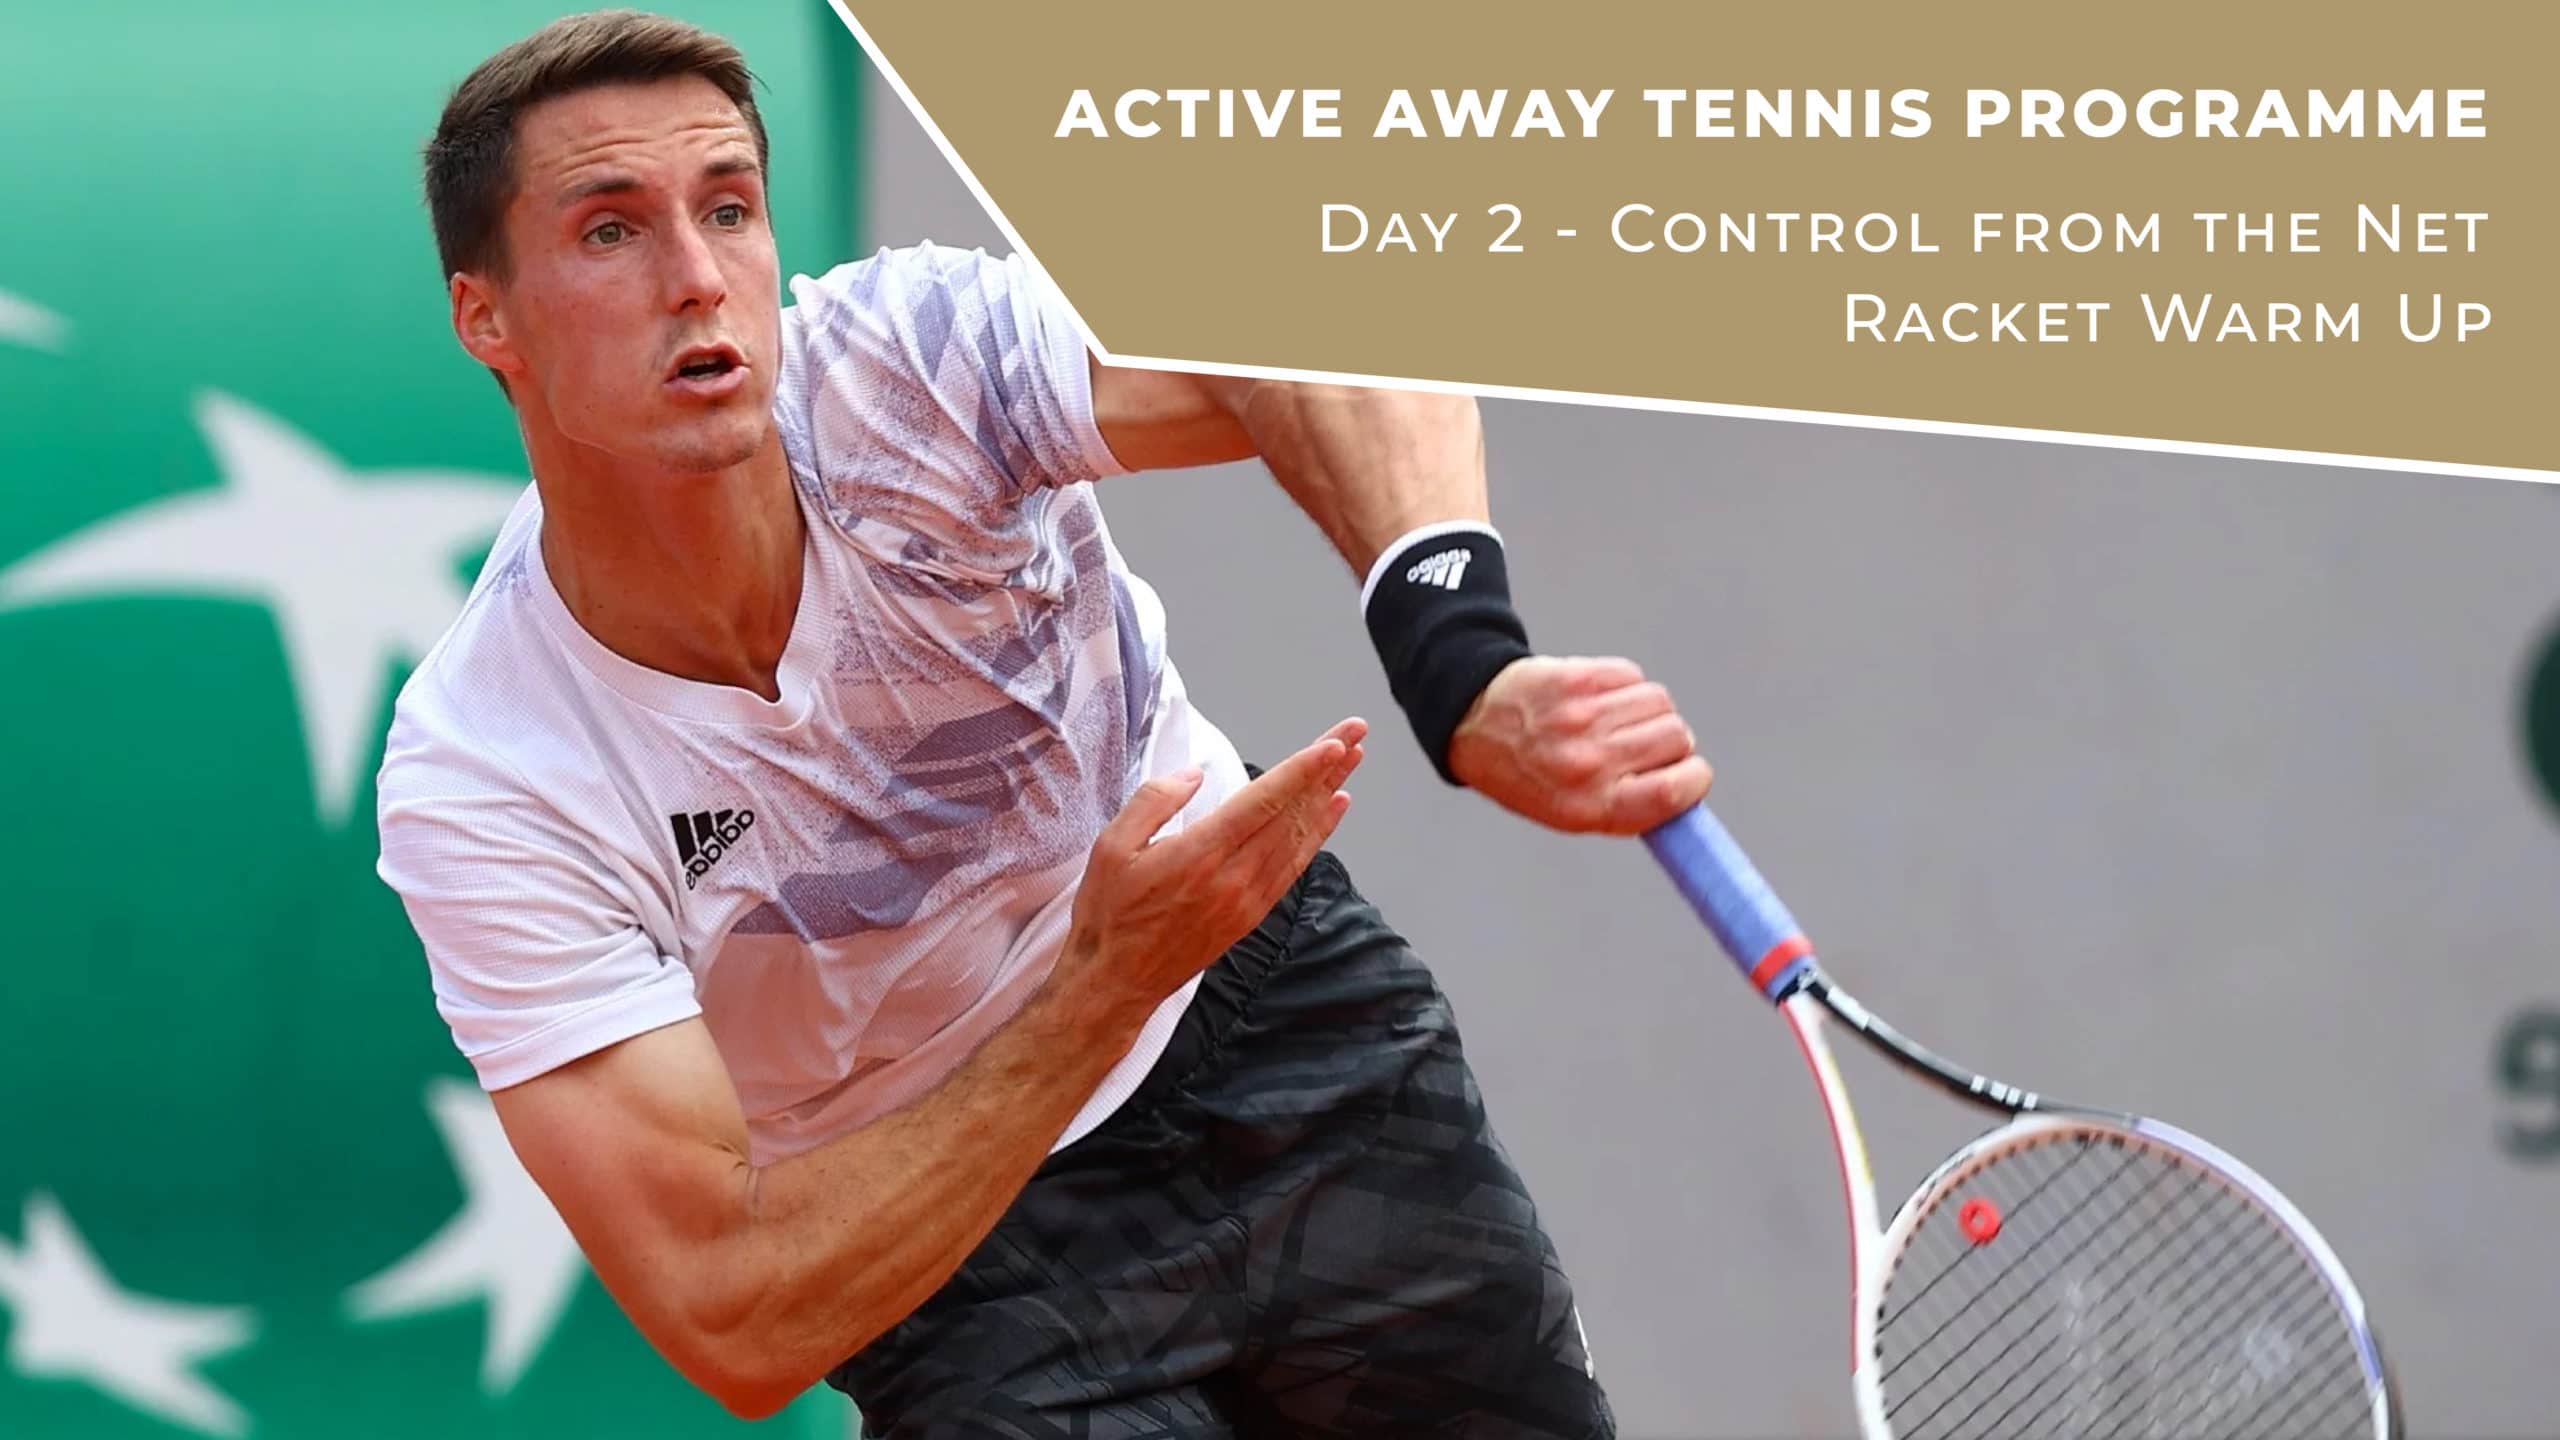 Day 2 - Control The Net - Racket Warm Up | Active Away Tennis Programme